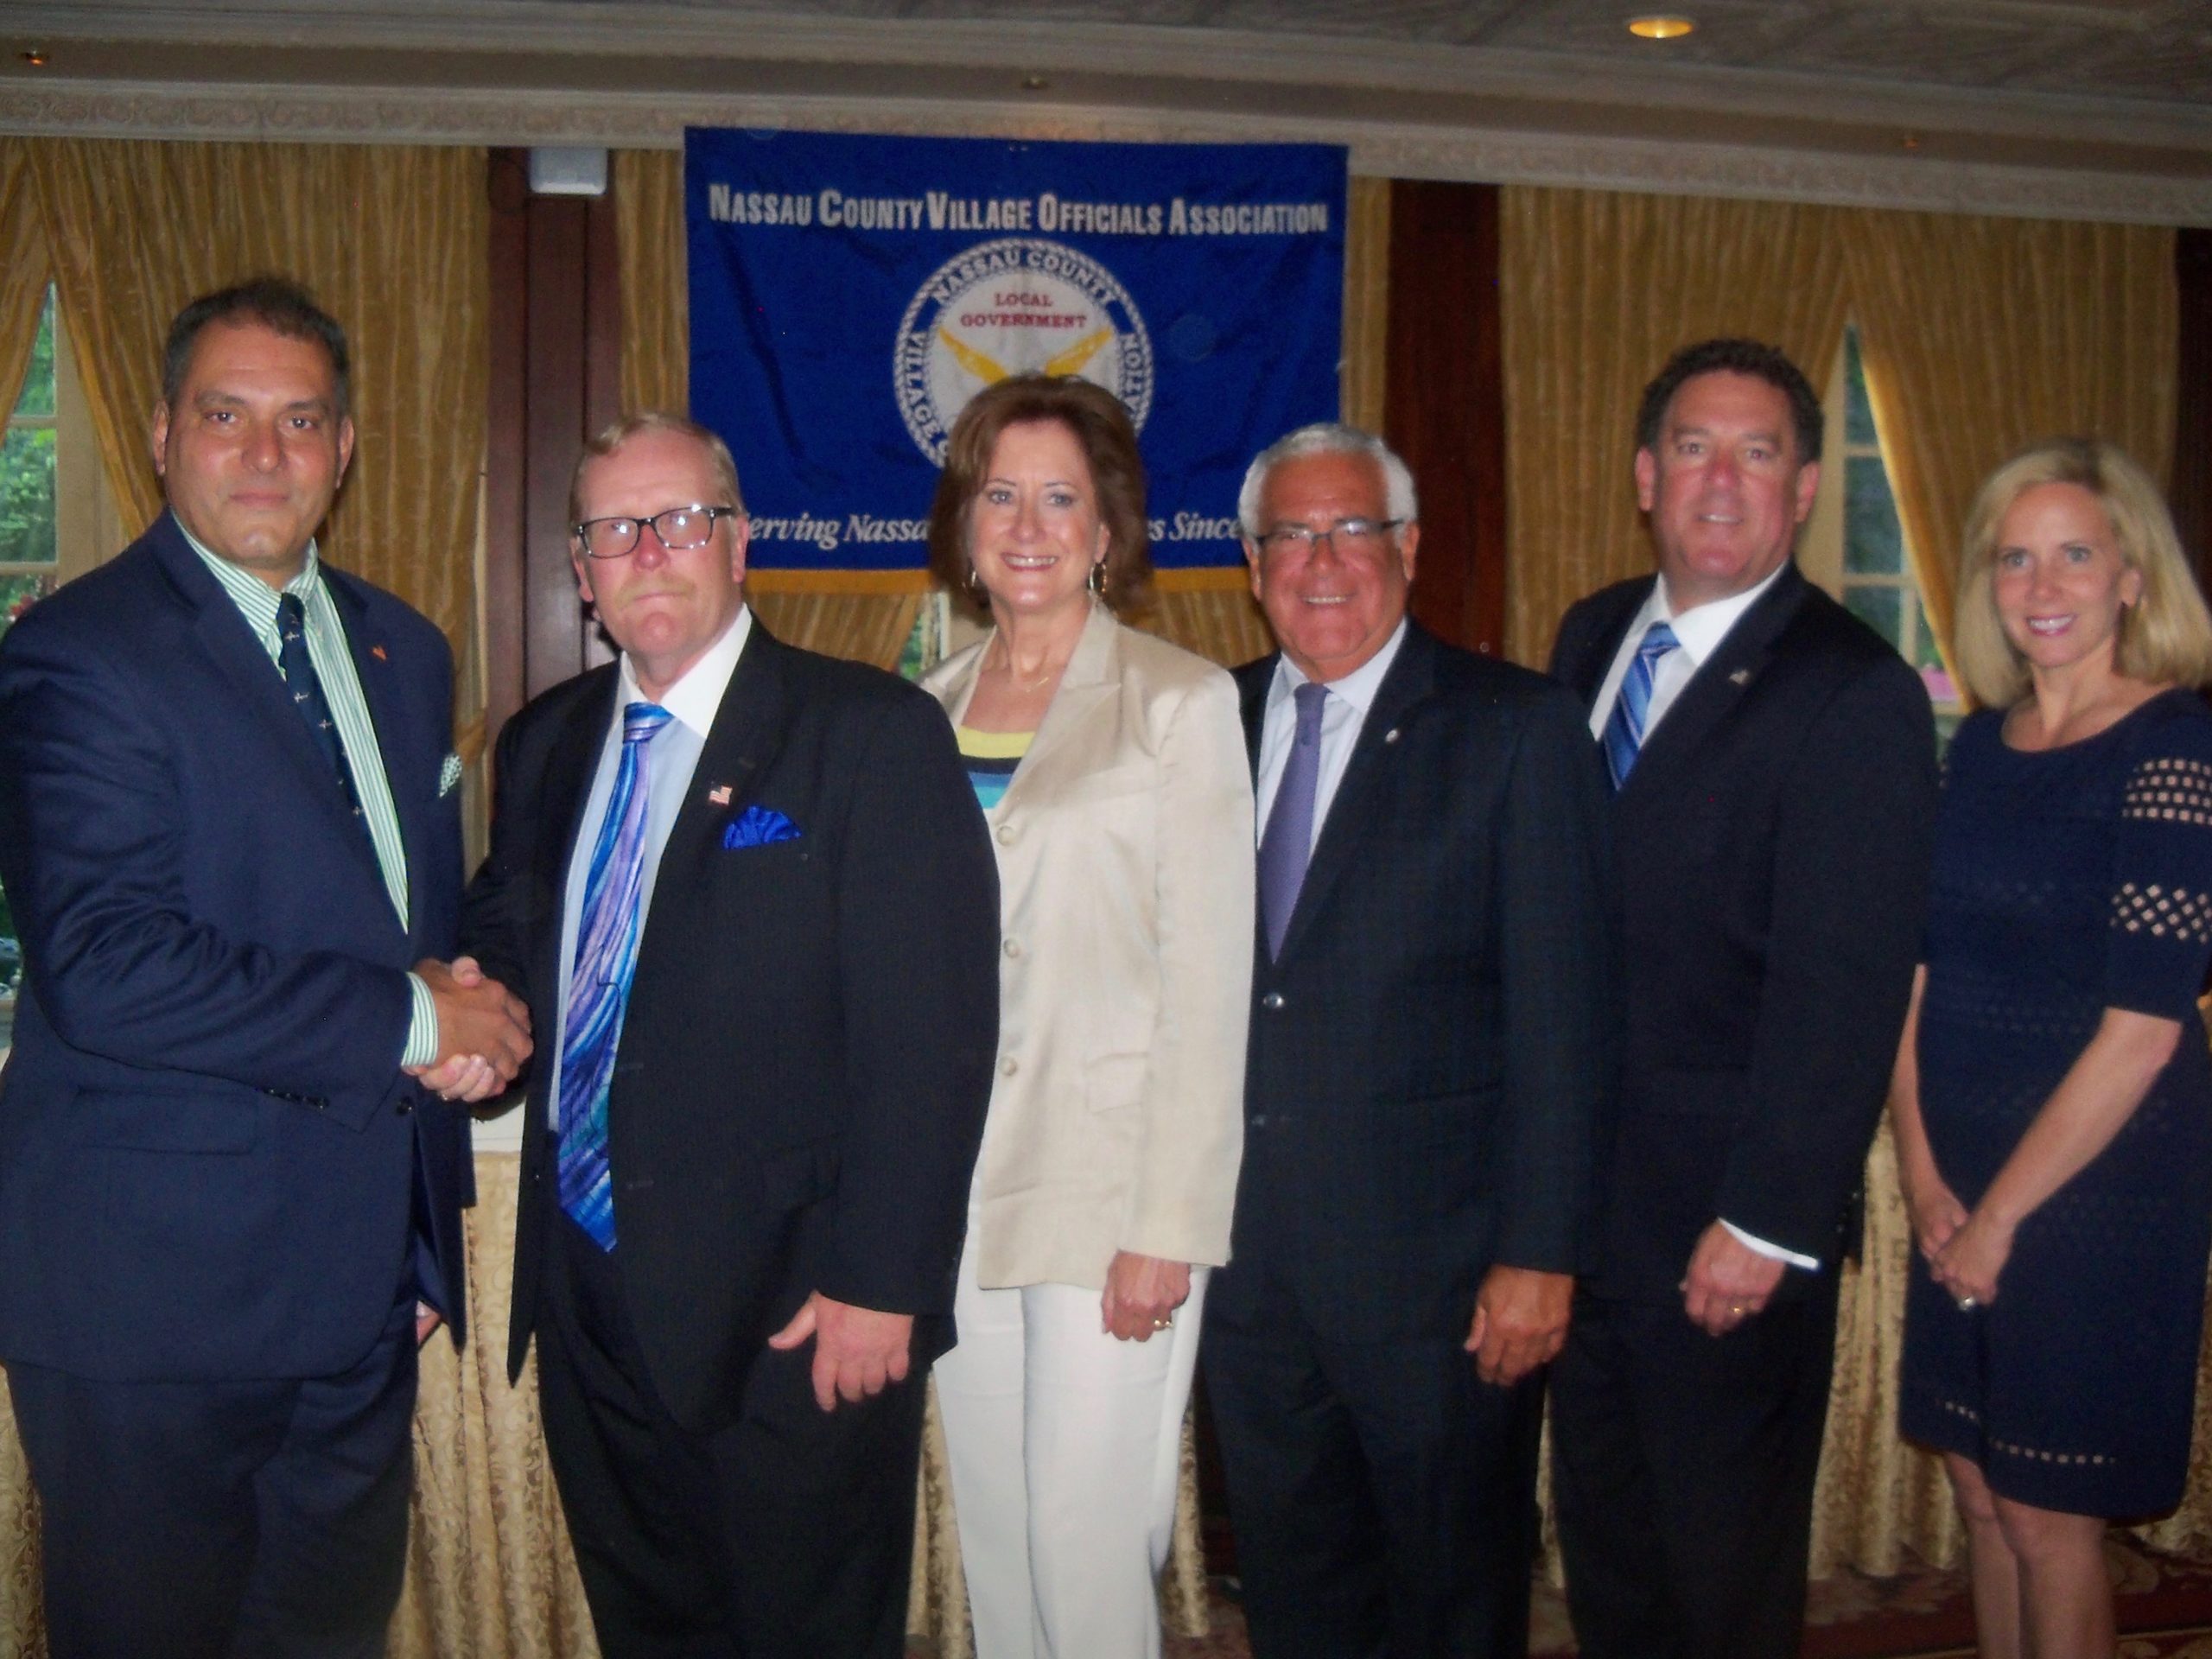 Oyster Bay Town Supervisor Joseph Saladino and Hempstead Town Supervisor Laura Gillen administered the oath of office to Mayor Celender and the NCVOA officers for 2018-2019, including President Ralph Ekstrand, mayor of the Village of Farmingdale, Mayor Celender, 2nd Vice President Edward Lieberman, mayor of the Village of Sea Cliff, and Treasurer Daniel Serota, mayor of the Village of Brookville. (Photo courtesy of NCVOA)